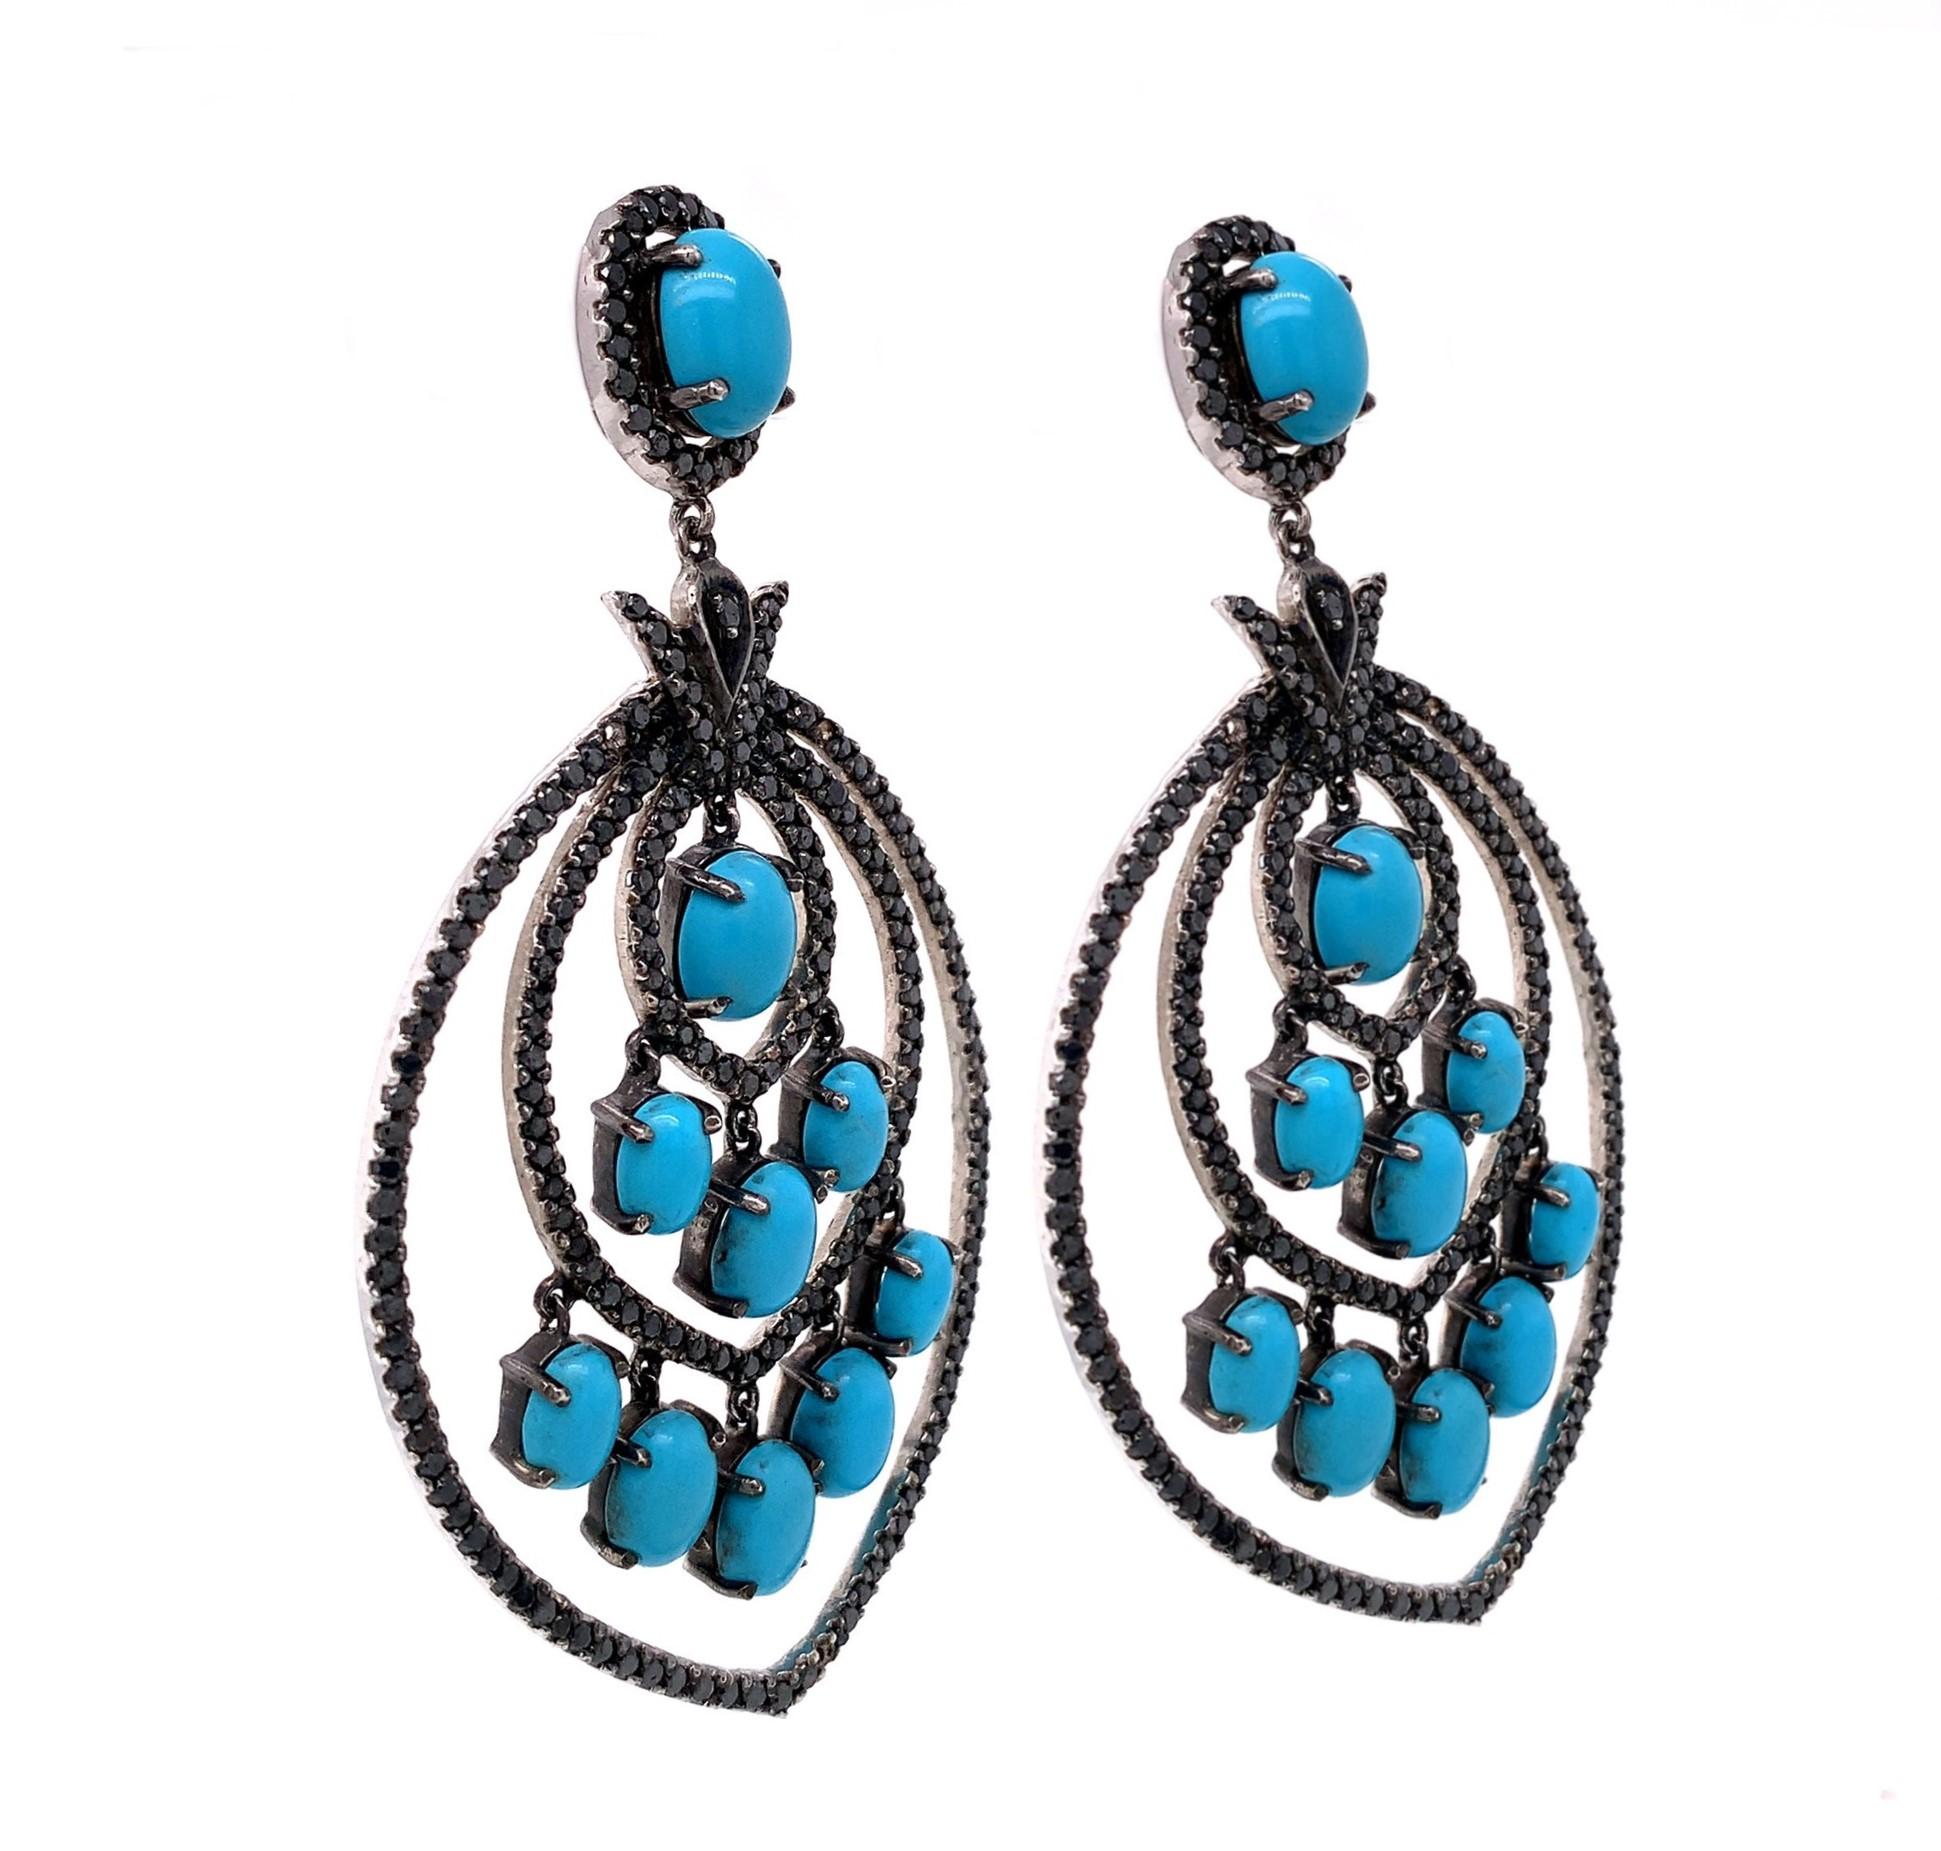 Life in color Collection

Strong expression of blue Turquoise accented by black Diamonds chandelier style Statement earrings set in blackened Sterling Silver.

Turquoise: 19.36ct total weight.
Diamond: 6.28ct total weight.